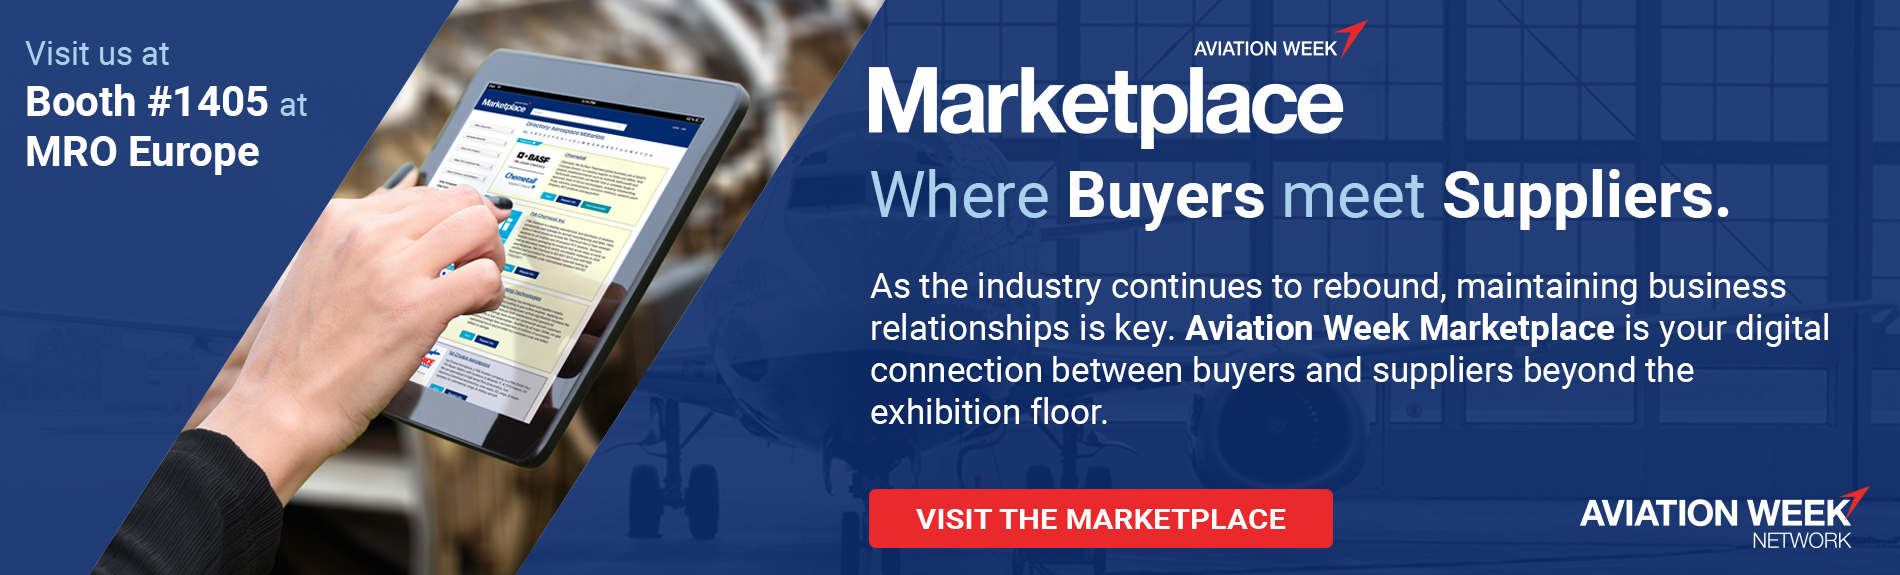 Visit AW Marketplace: Booth 1405 at MRO Europe